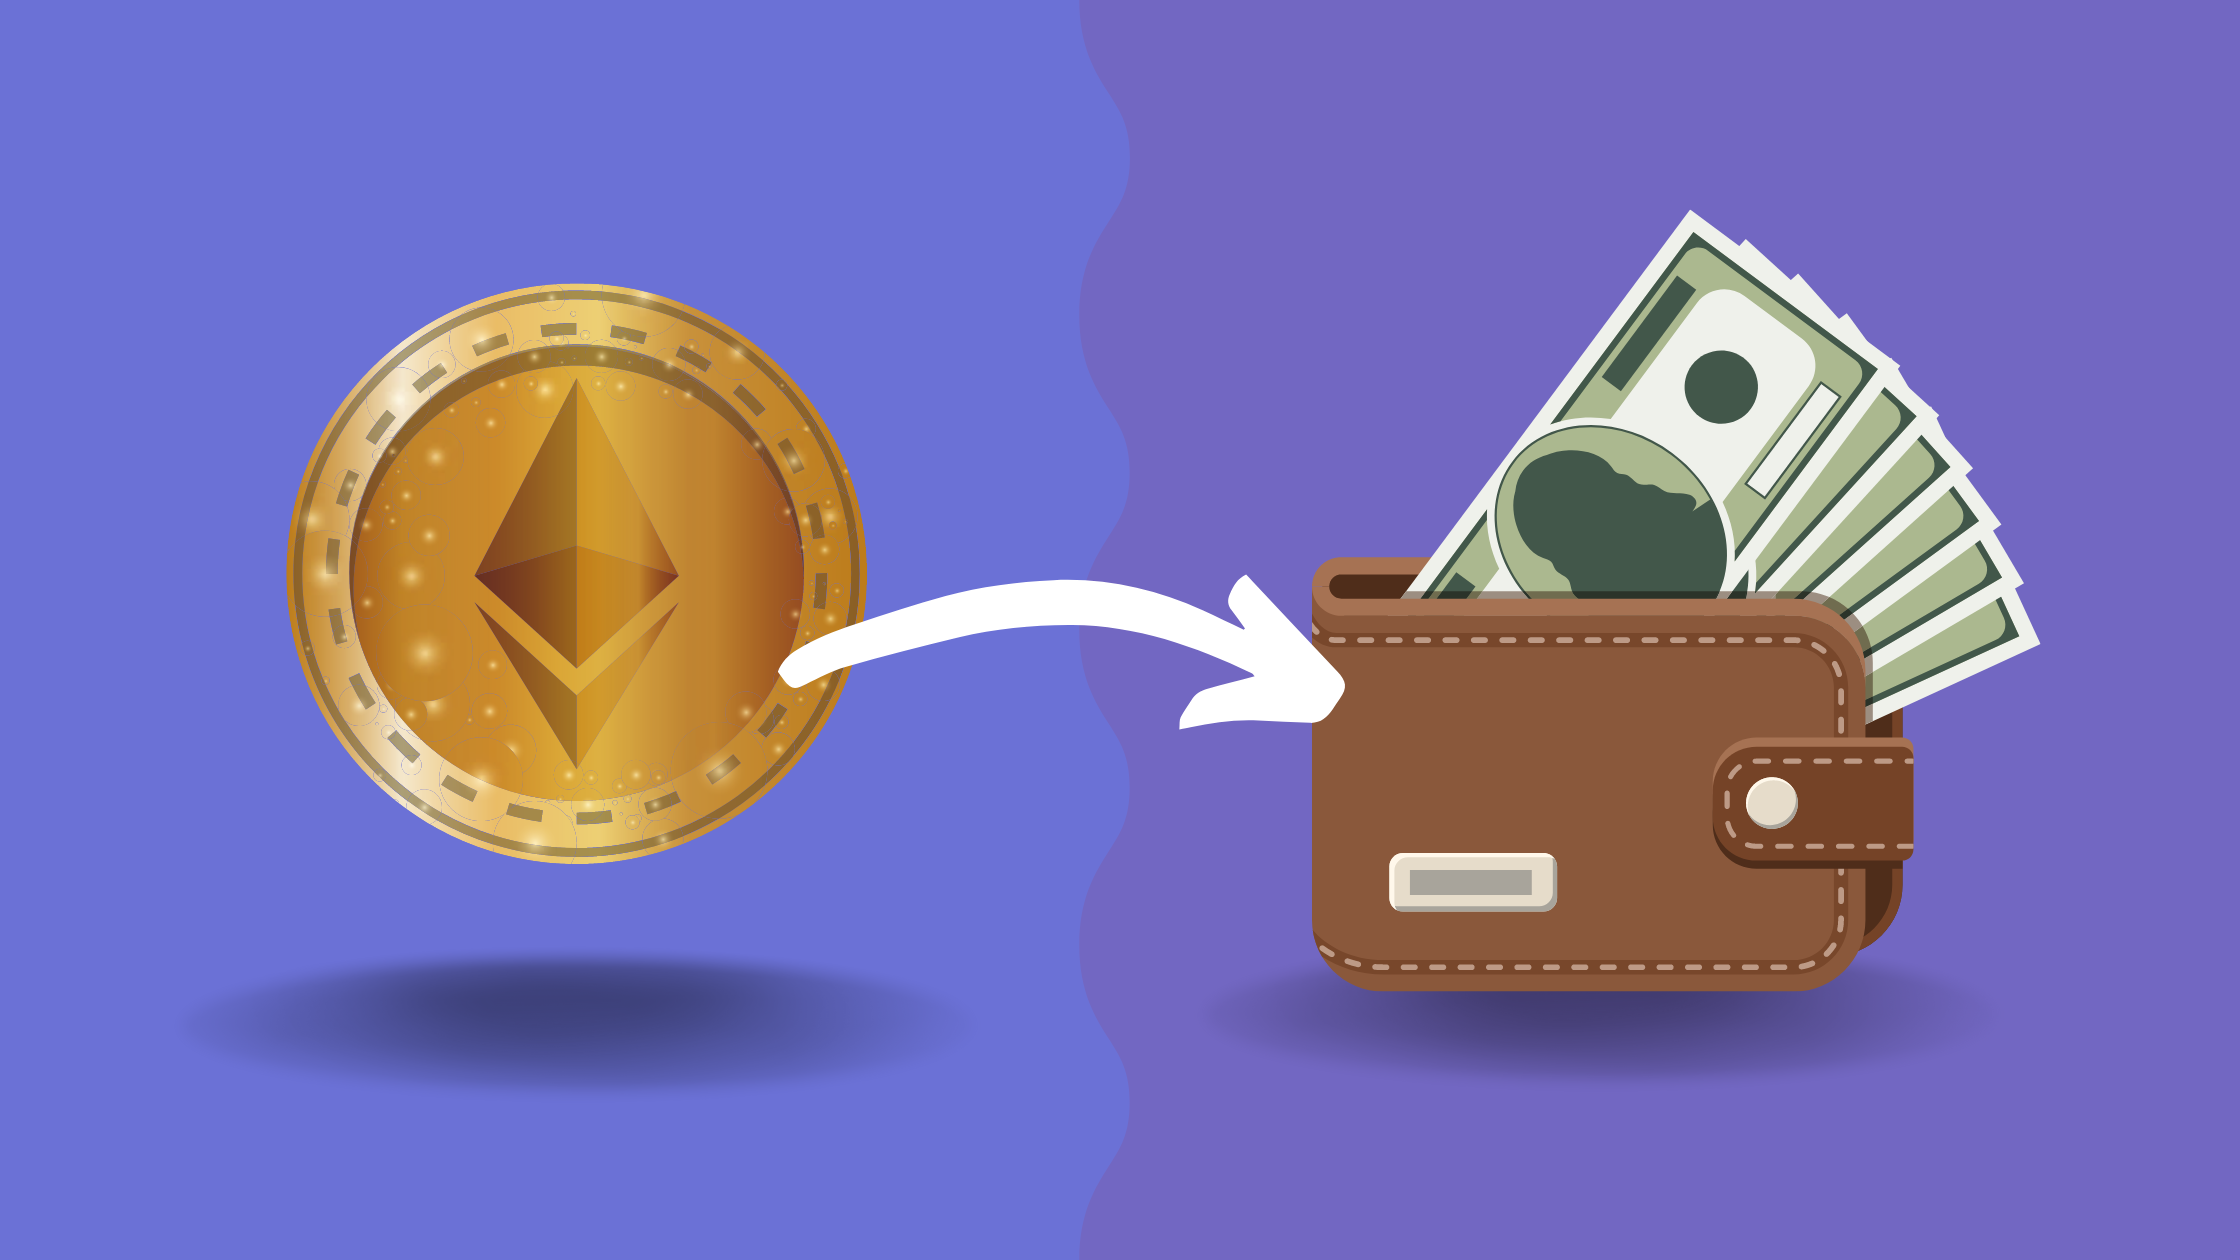 How to Cash Out Ethereum? BEST Ways to Withdraw Ethereum to Cash